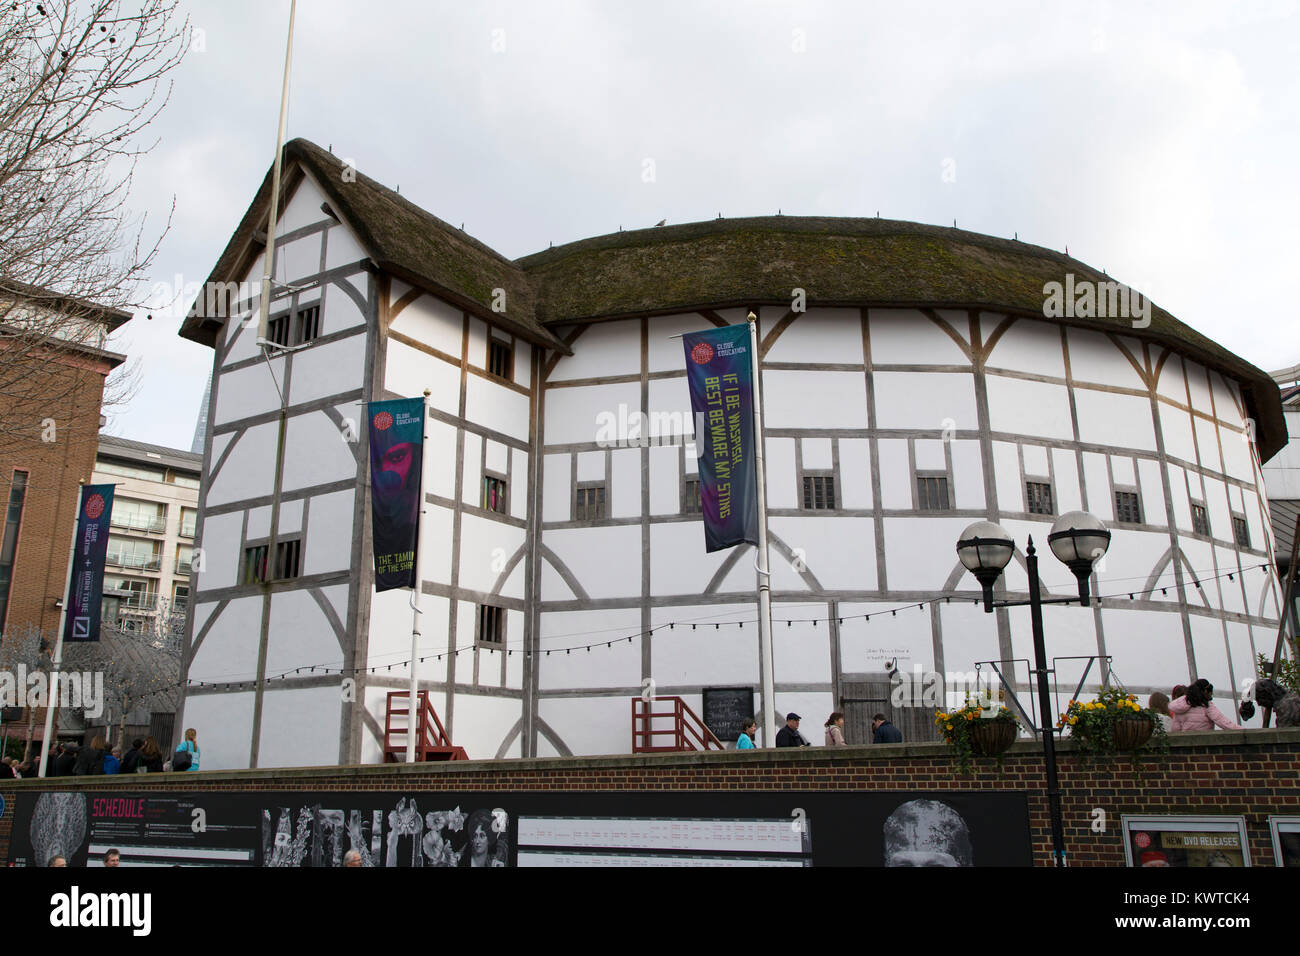 Shakespeare's Globe in London, England. The theatre in Southwark is a reconstruction of an Elizabethan entertainment venue. Stock Photo